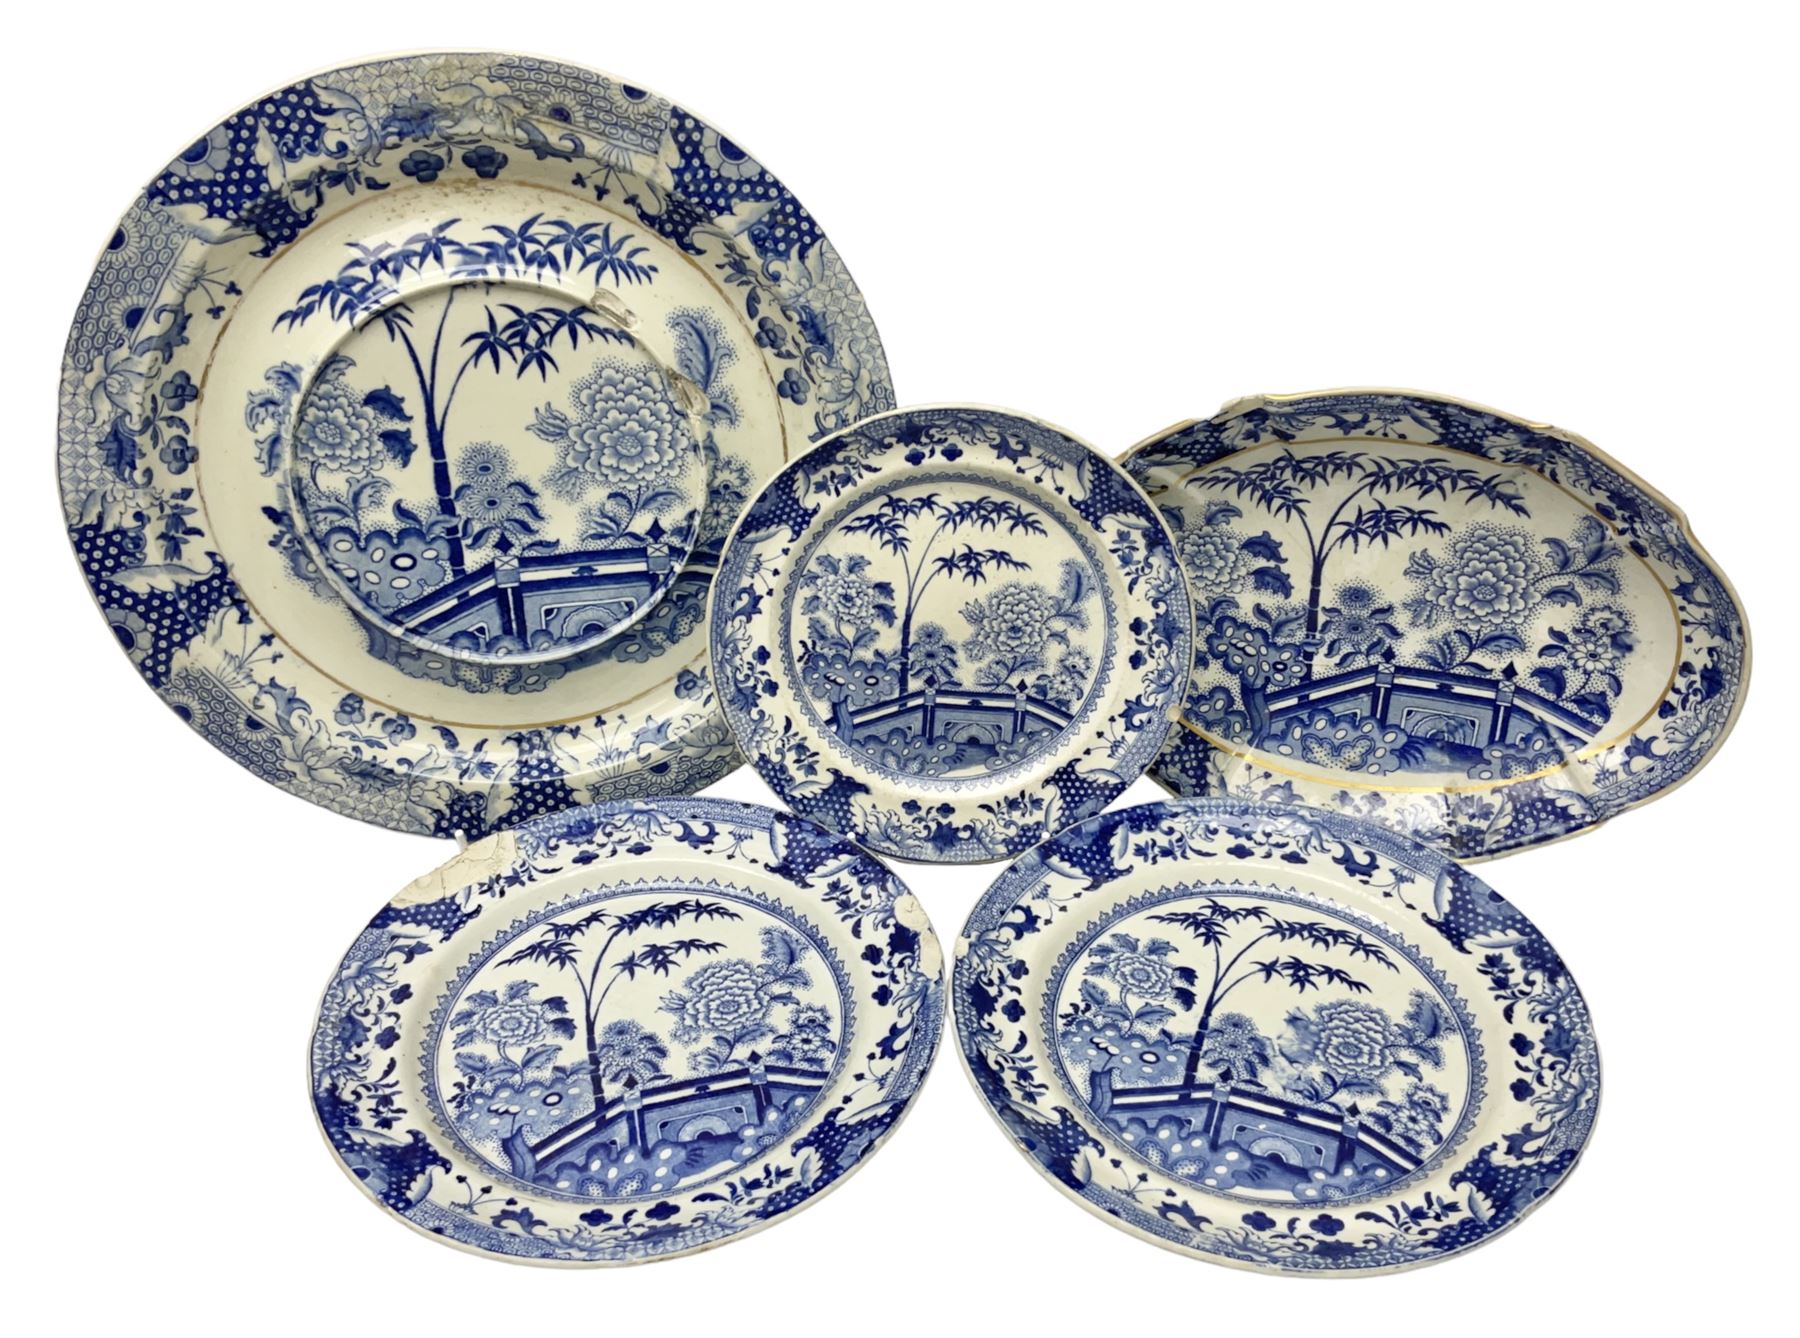 19th century Davenport bamboo and peony pattern dinner wares